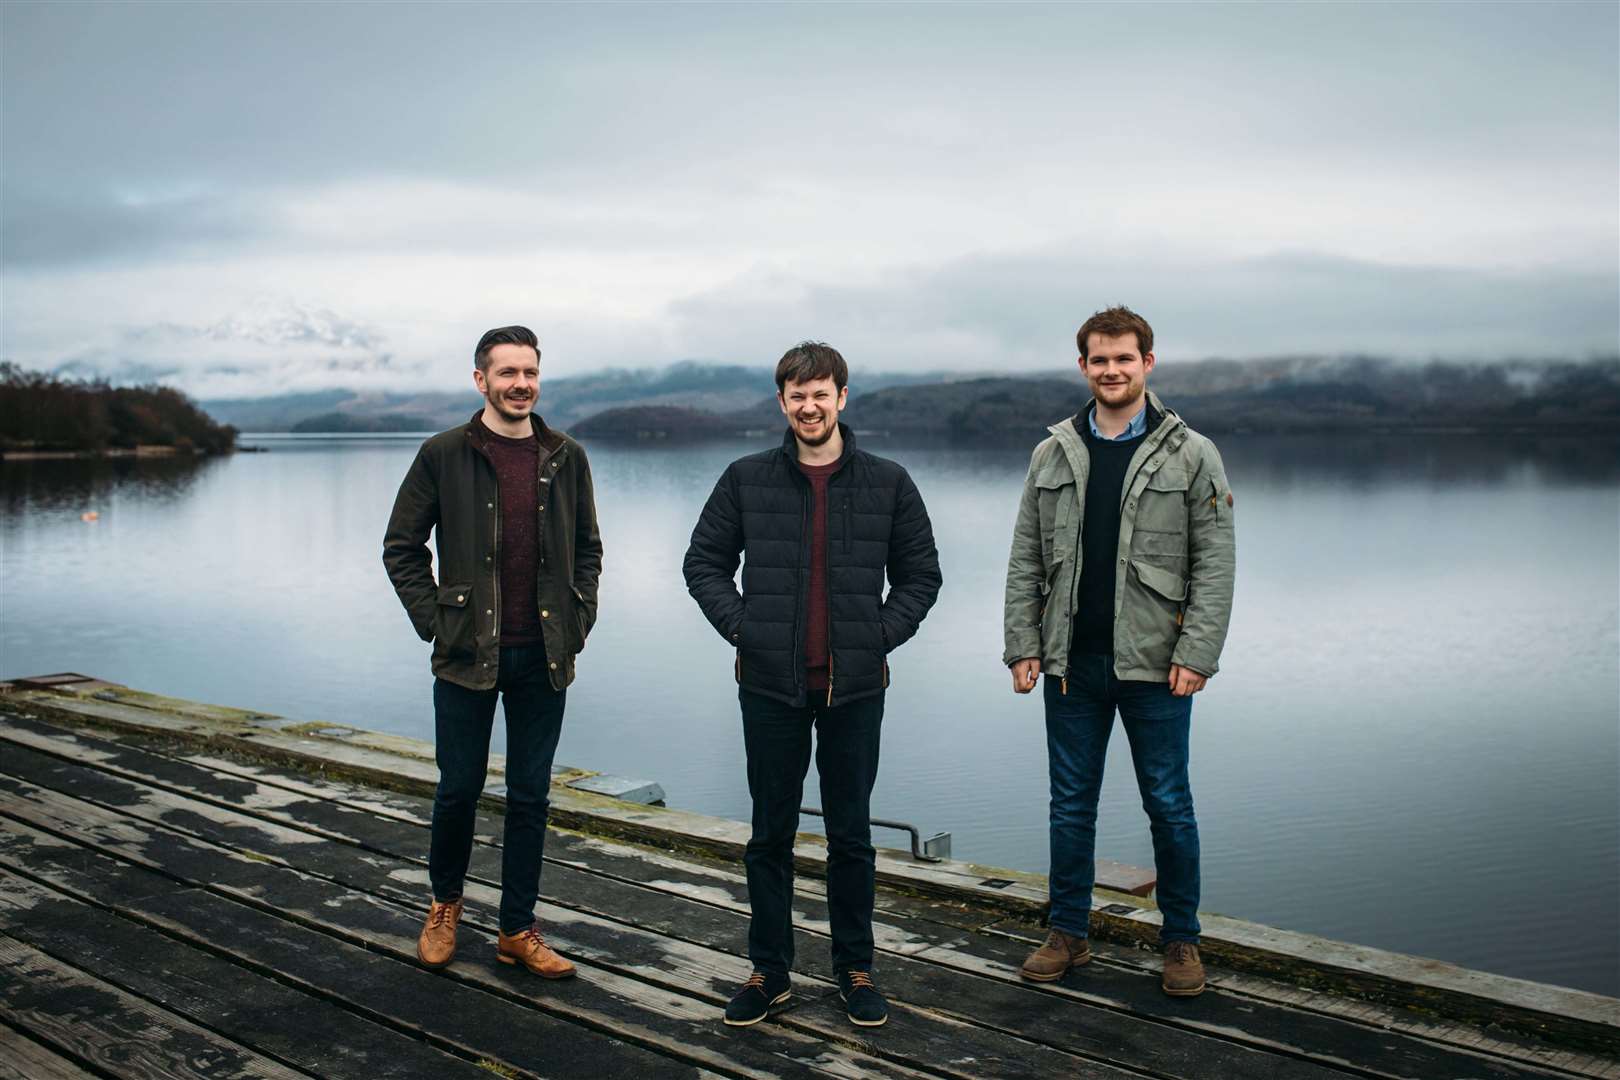 The band chose Assynt as their name because guitarist Innes White’s grandfather came from Assynt and the trio liked a famous pipe tune called John Morrison of Assynt House.